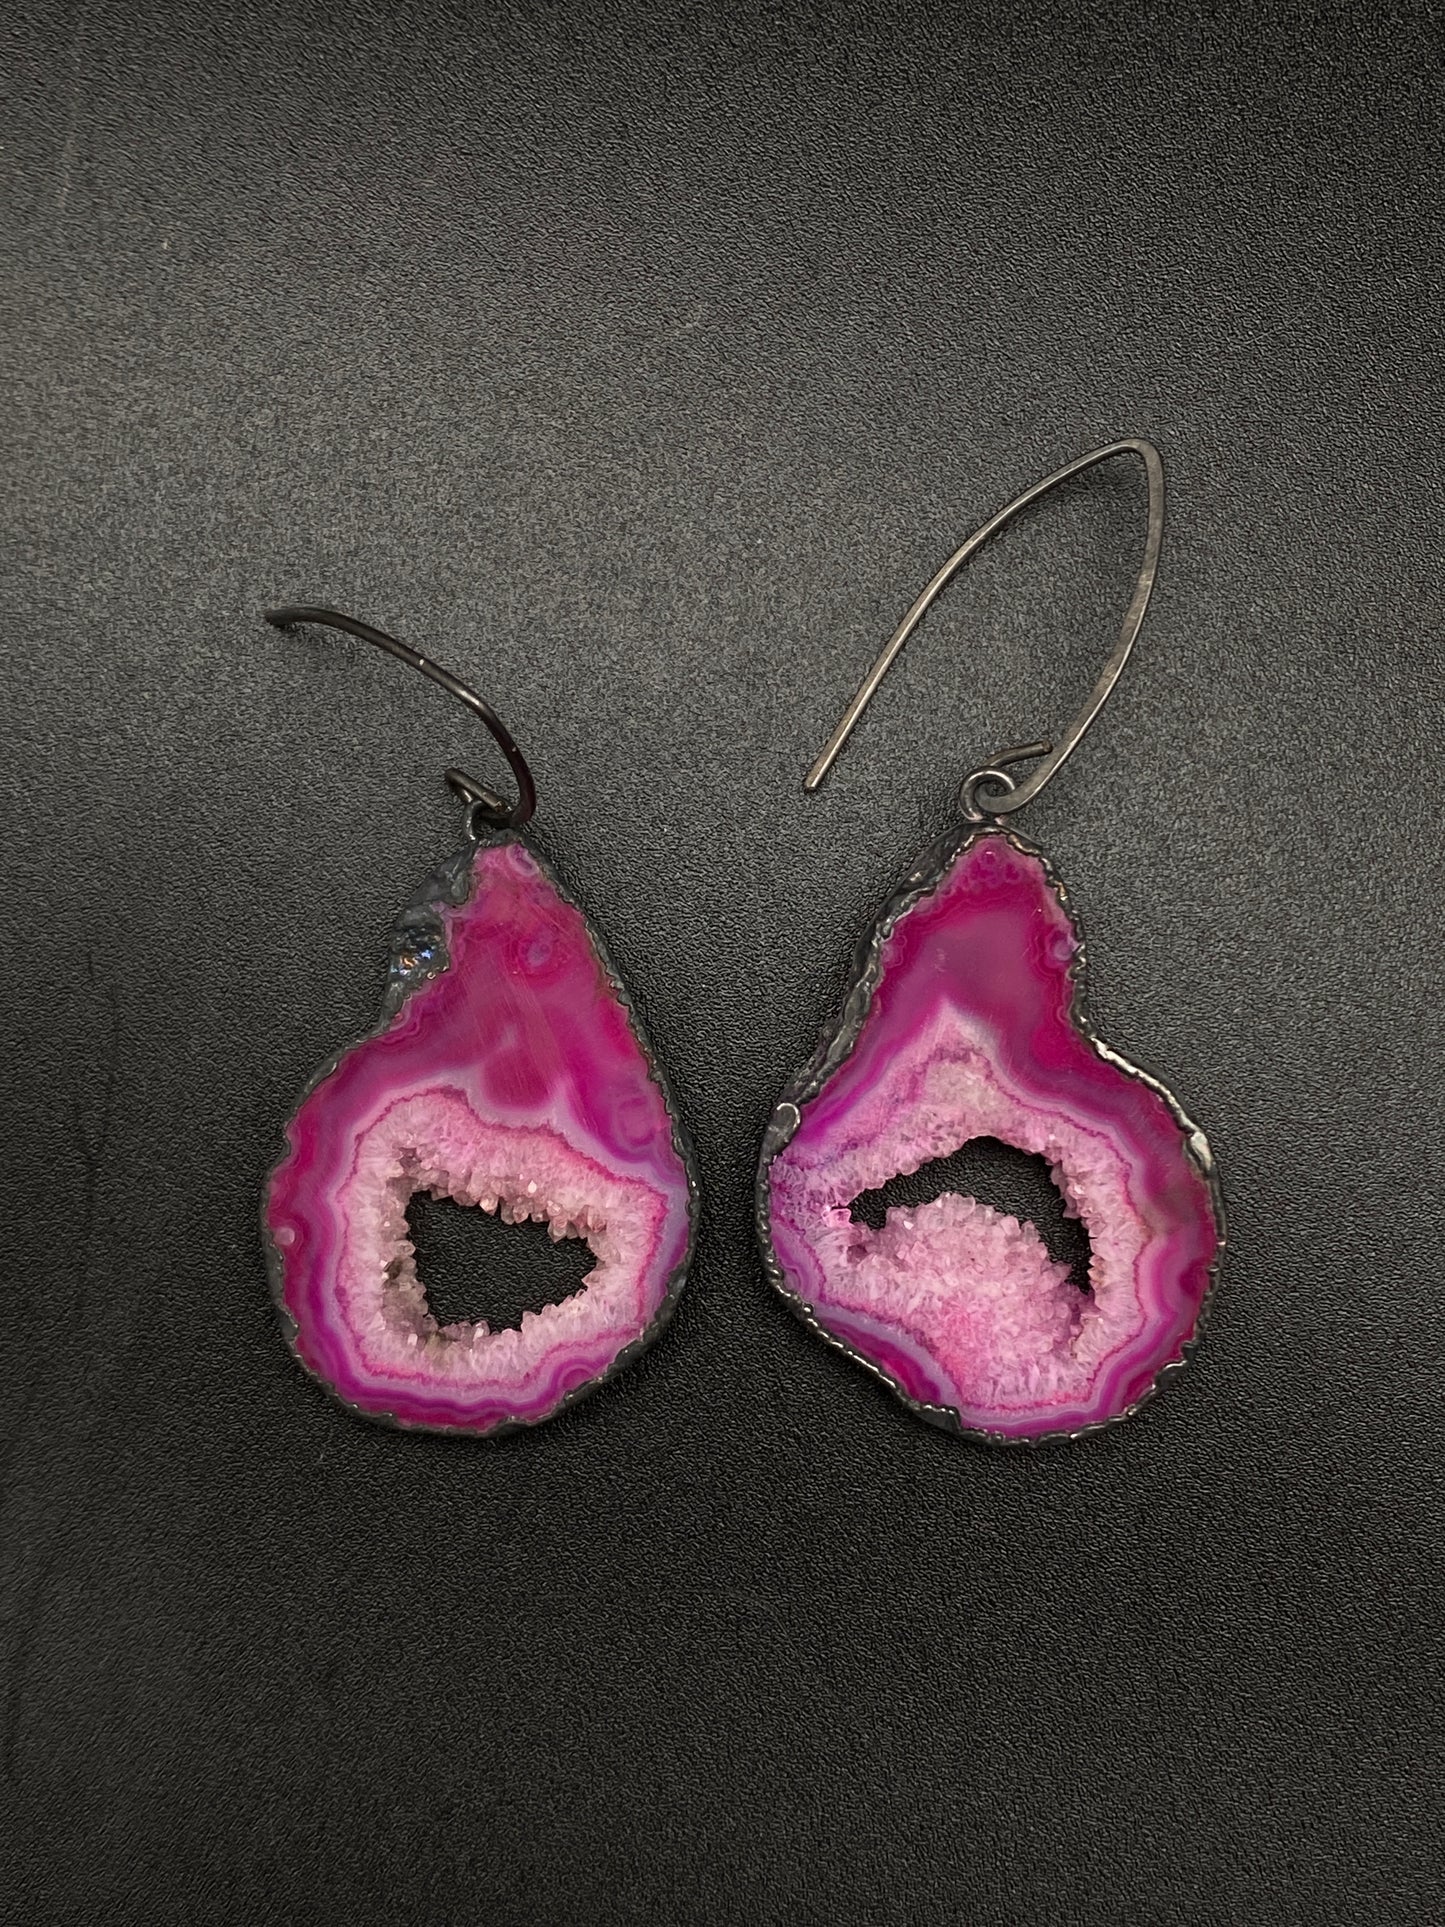 Openings ~ Agate Geode Slice Earrings Oxidized Silver Wires ~ Your Choice